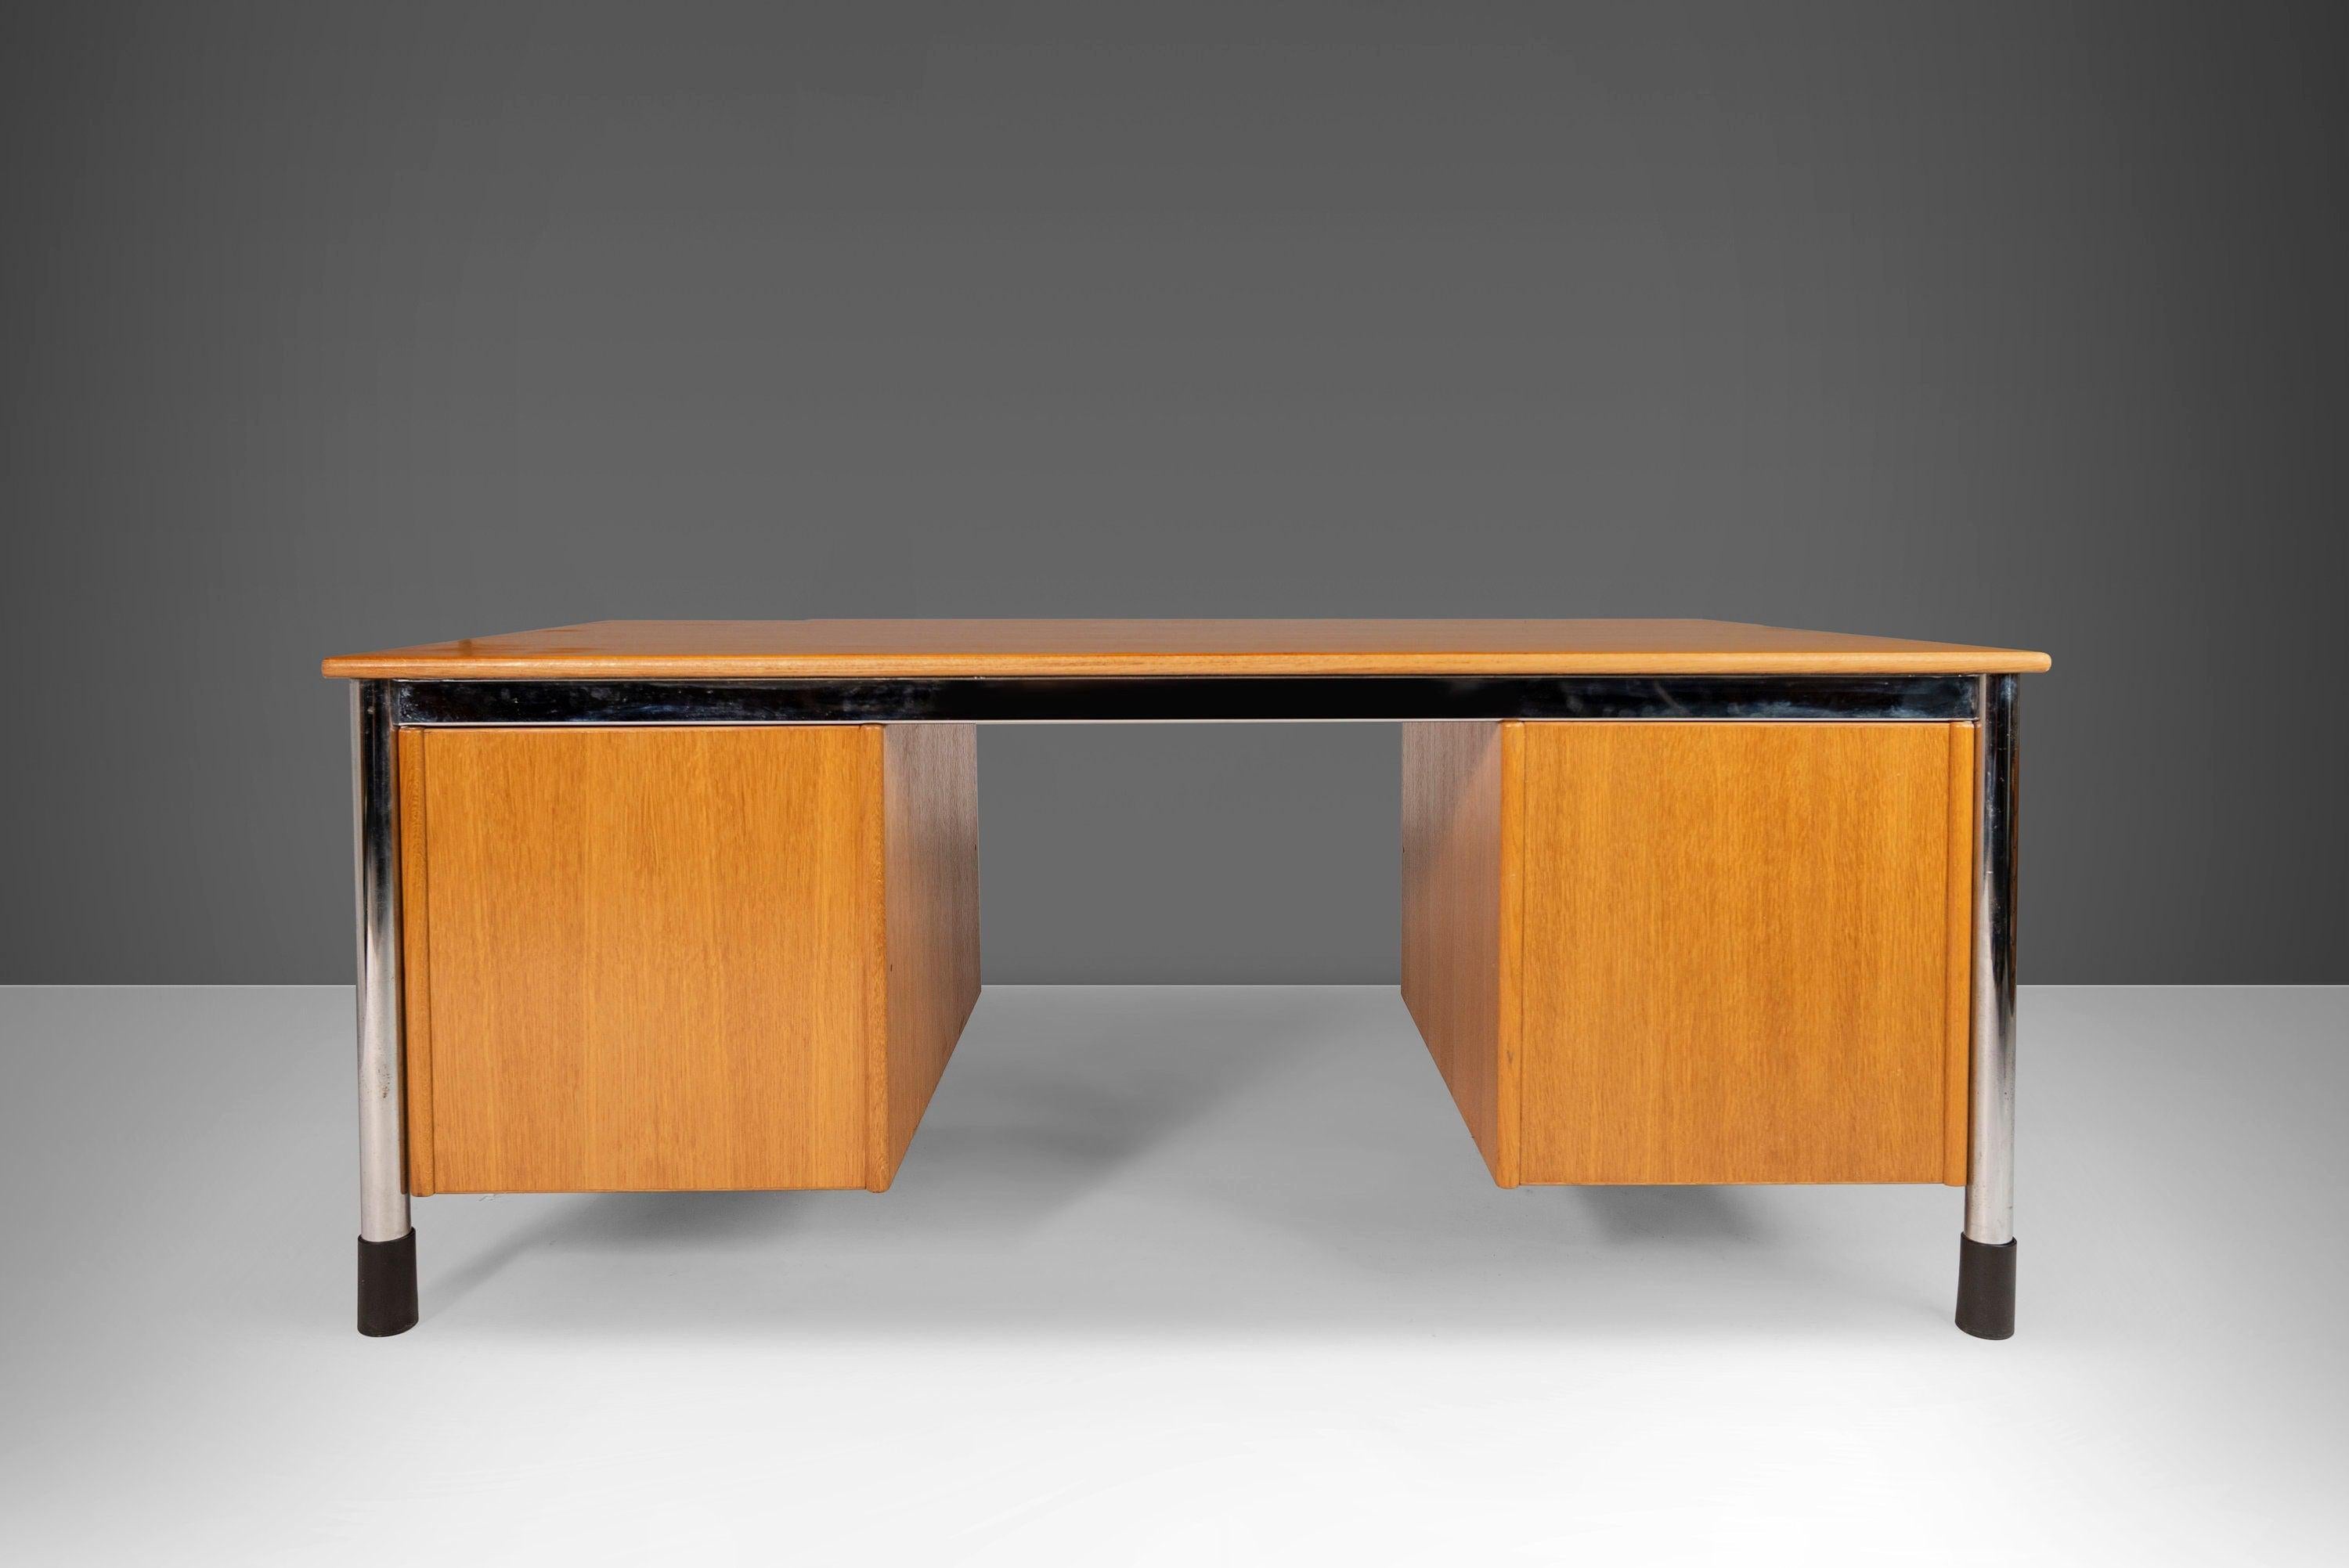 Late 20th Century Signatur Executive Desk by Tord Bjorklund in Oak and Chrome, Sweden, c. 1980 For Sale